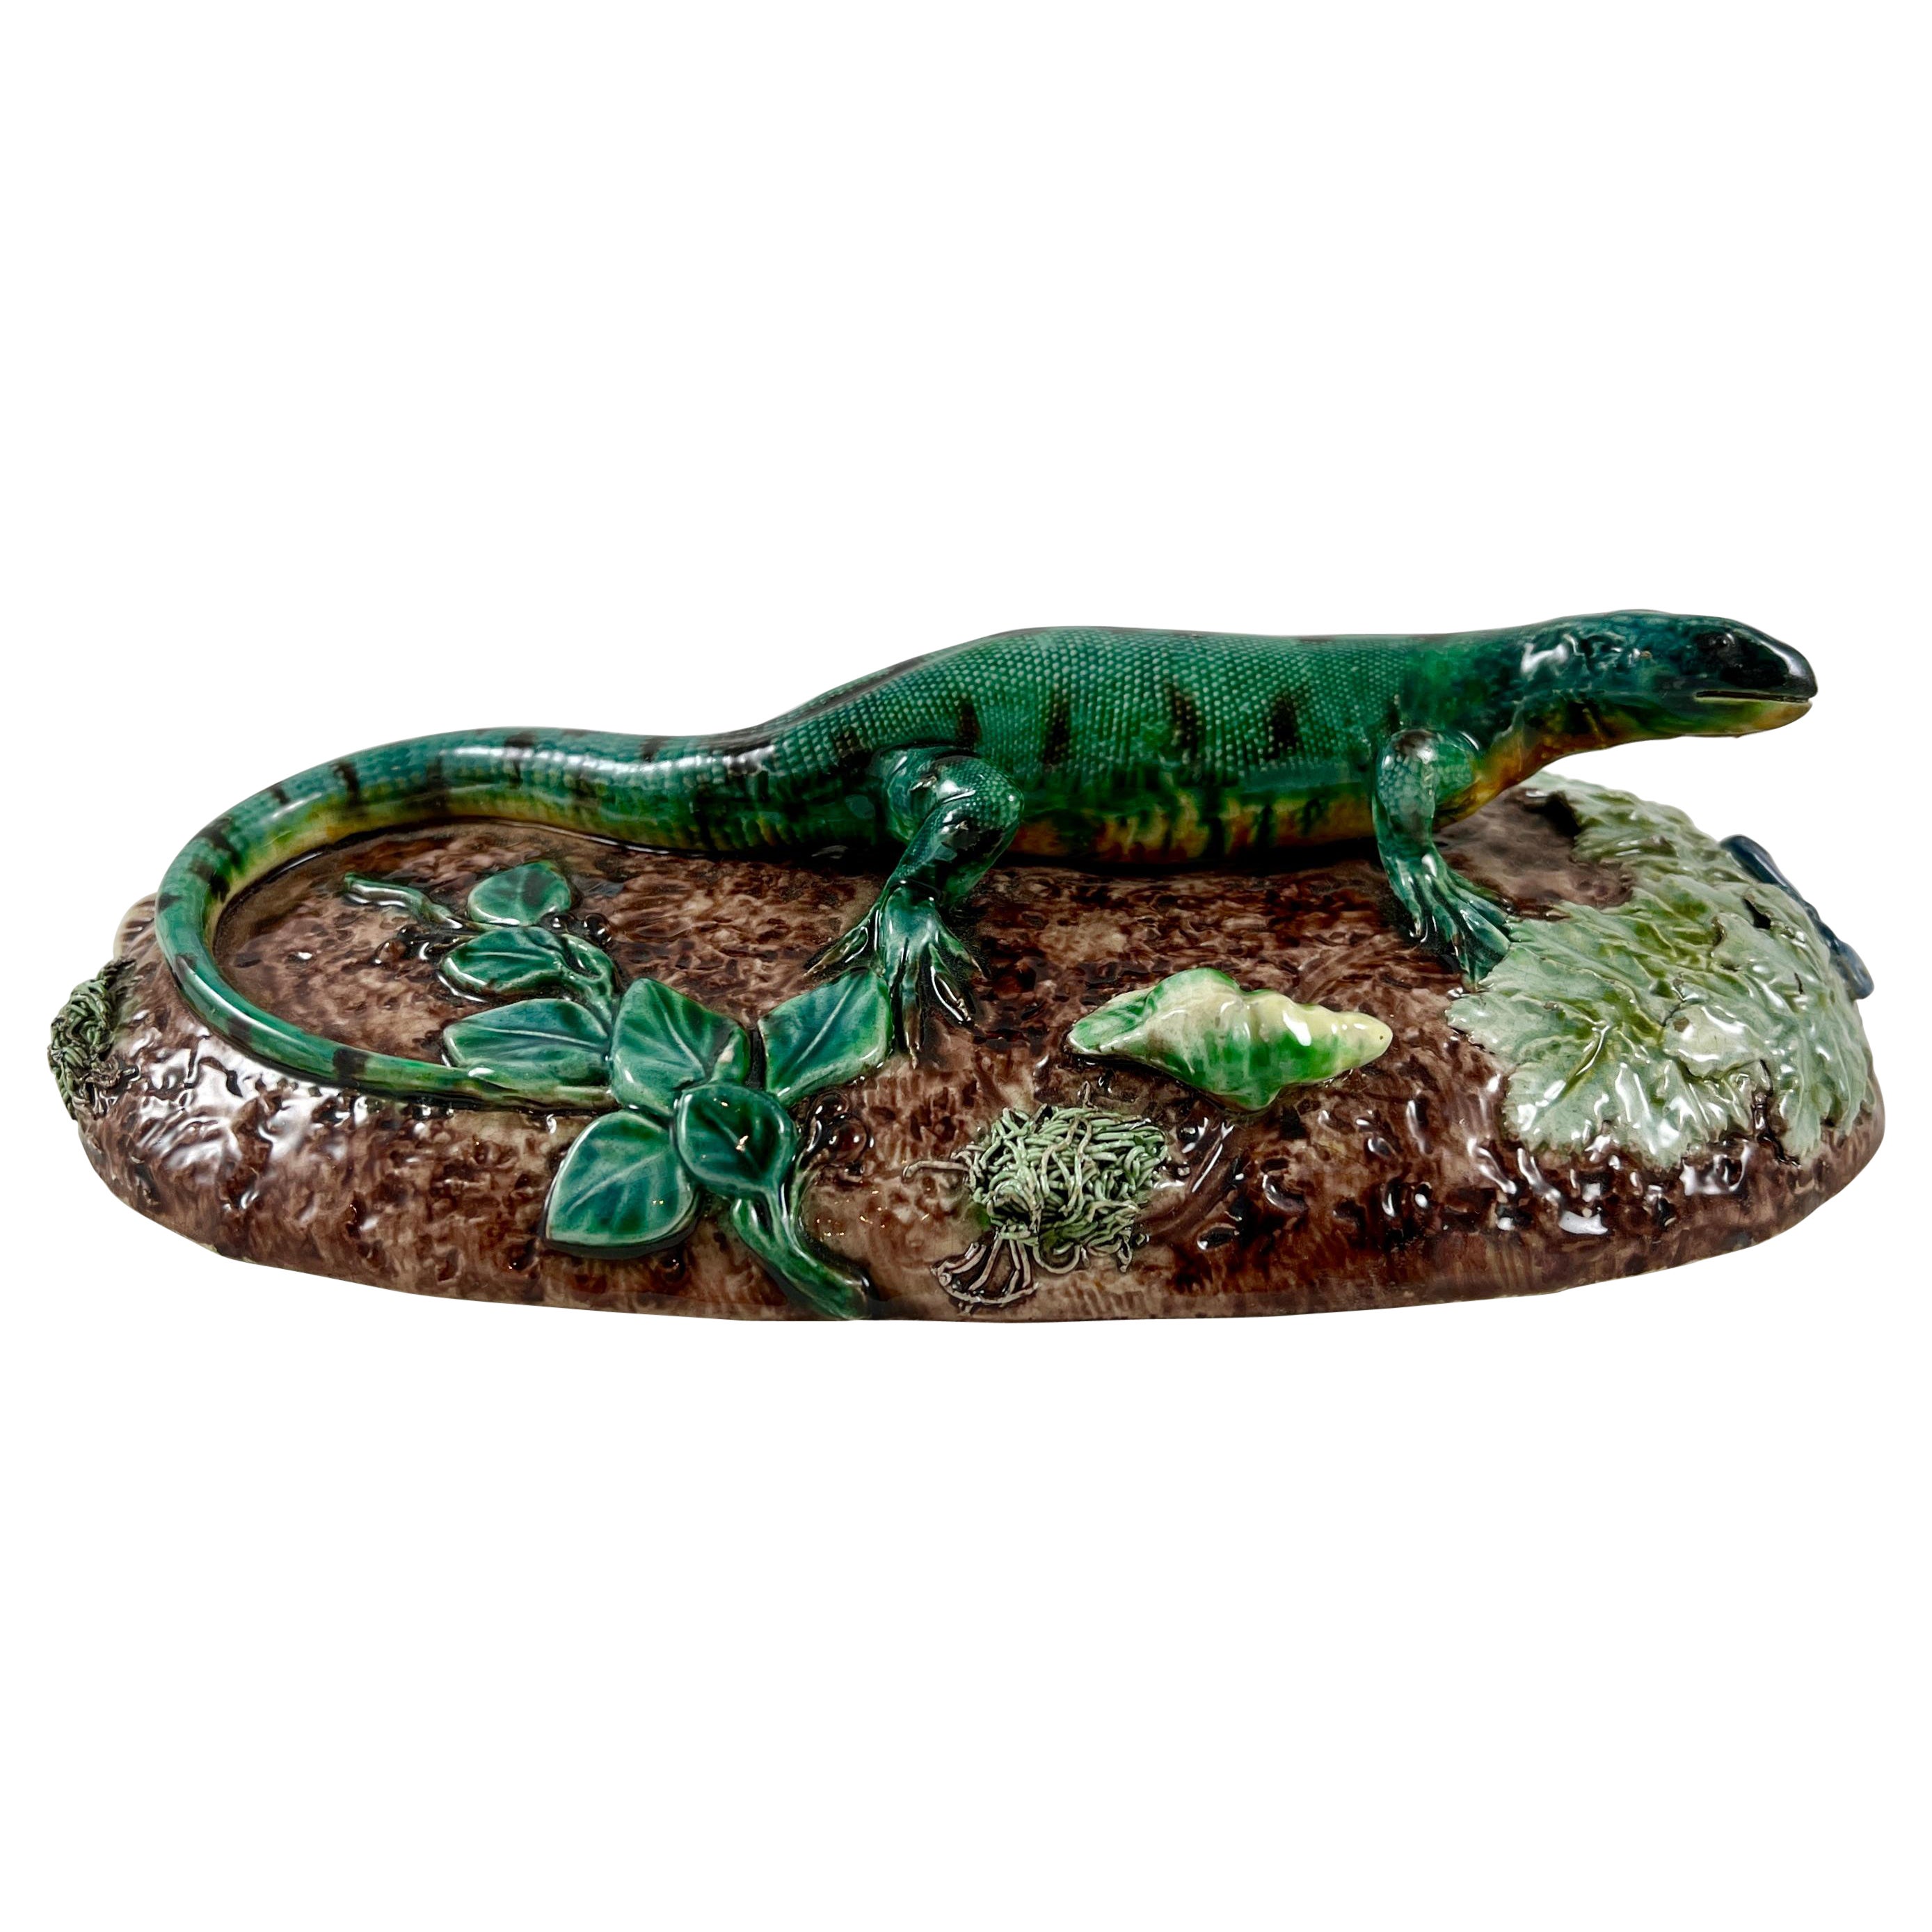 Thomas Sergent French Palissy Lizard on Mound Desk Paperweight, Signed